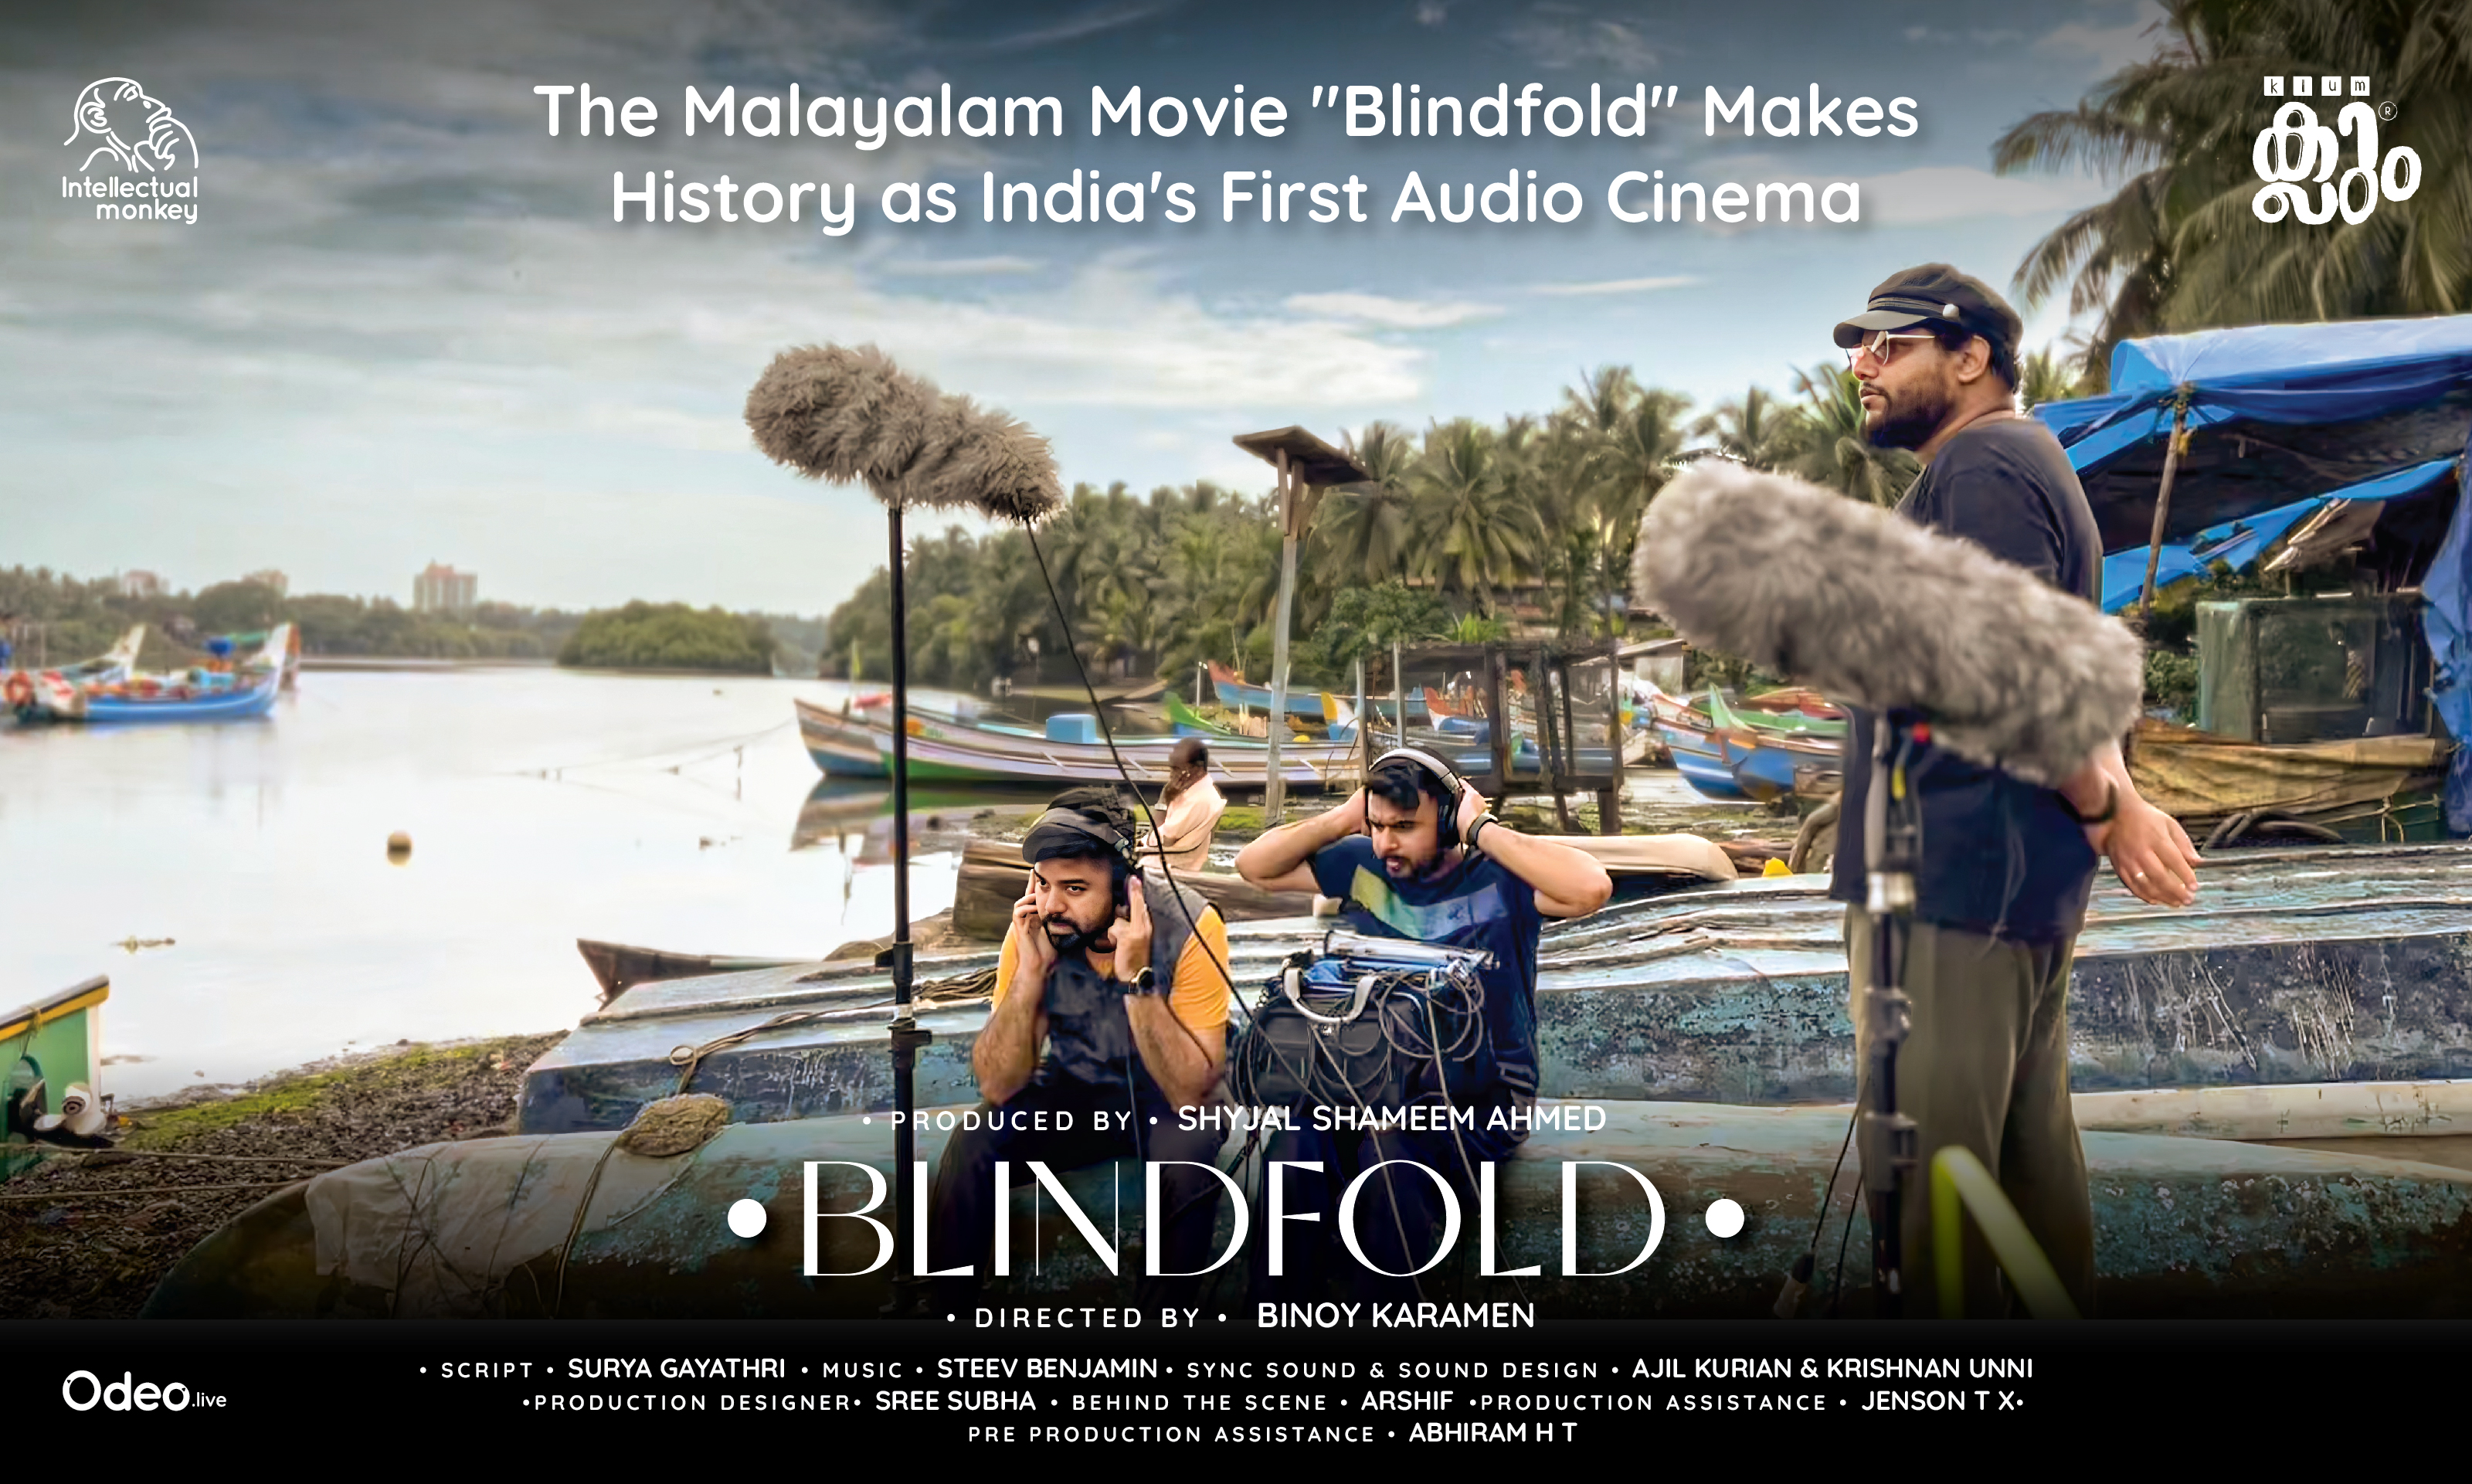 The Malayalam Movie "Blindfold" Makes History as India's First Audio Cinema